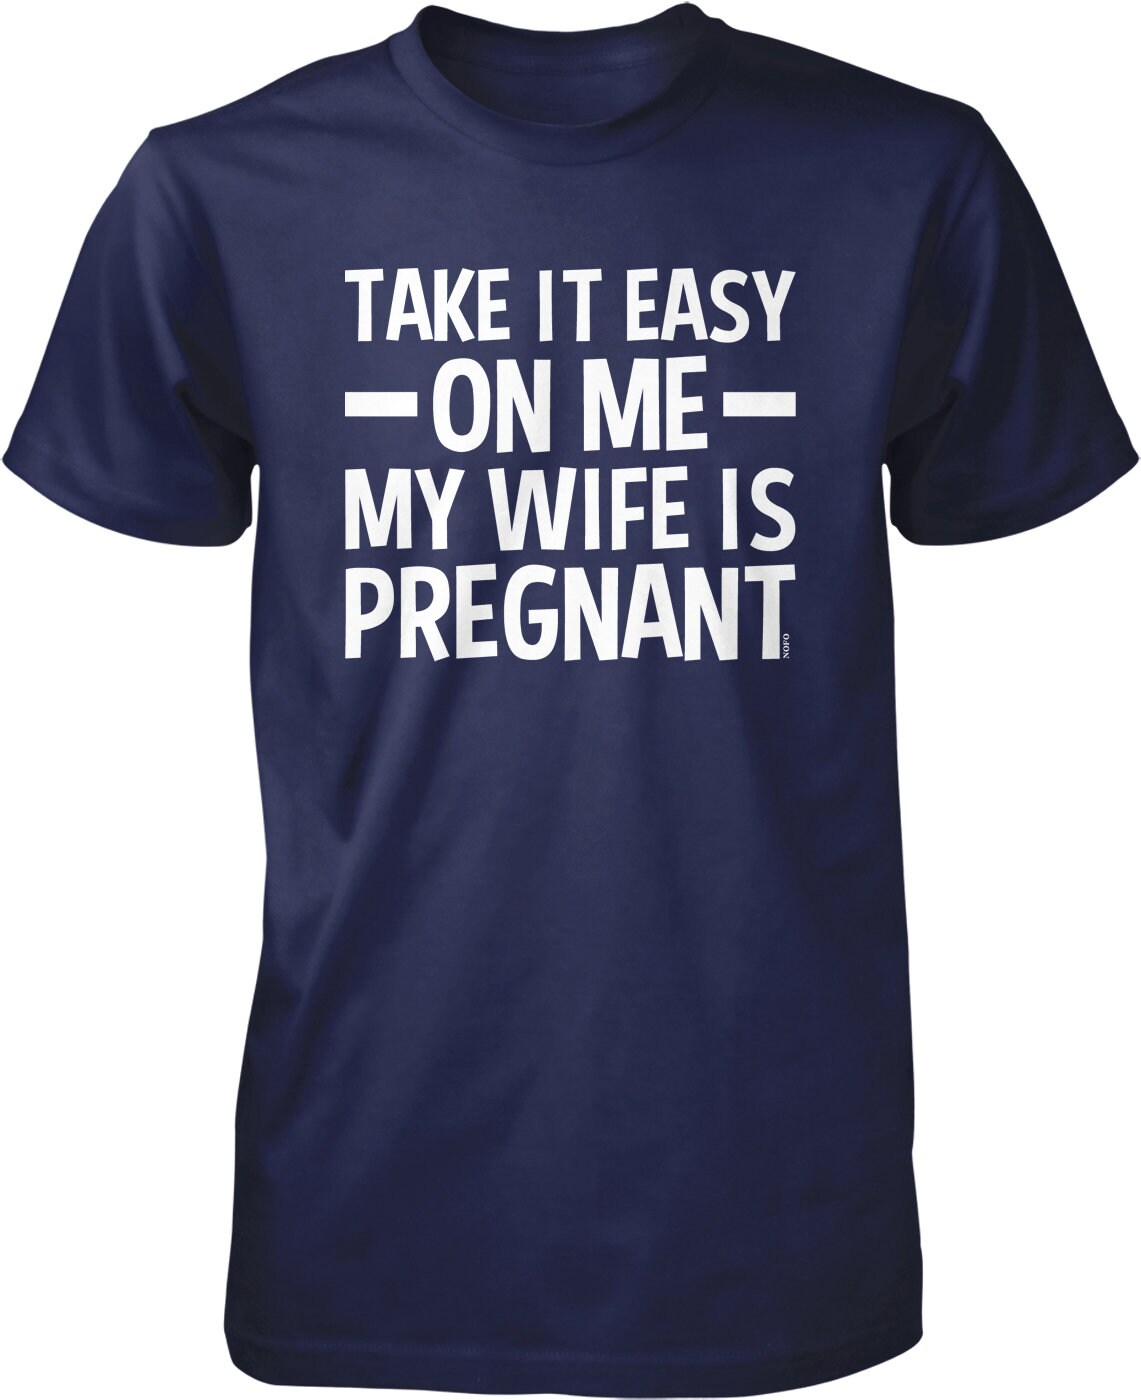 Take It Easy on Me My Wife is Pregnant Mens T-shirt